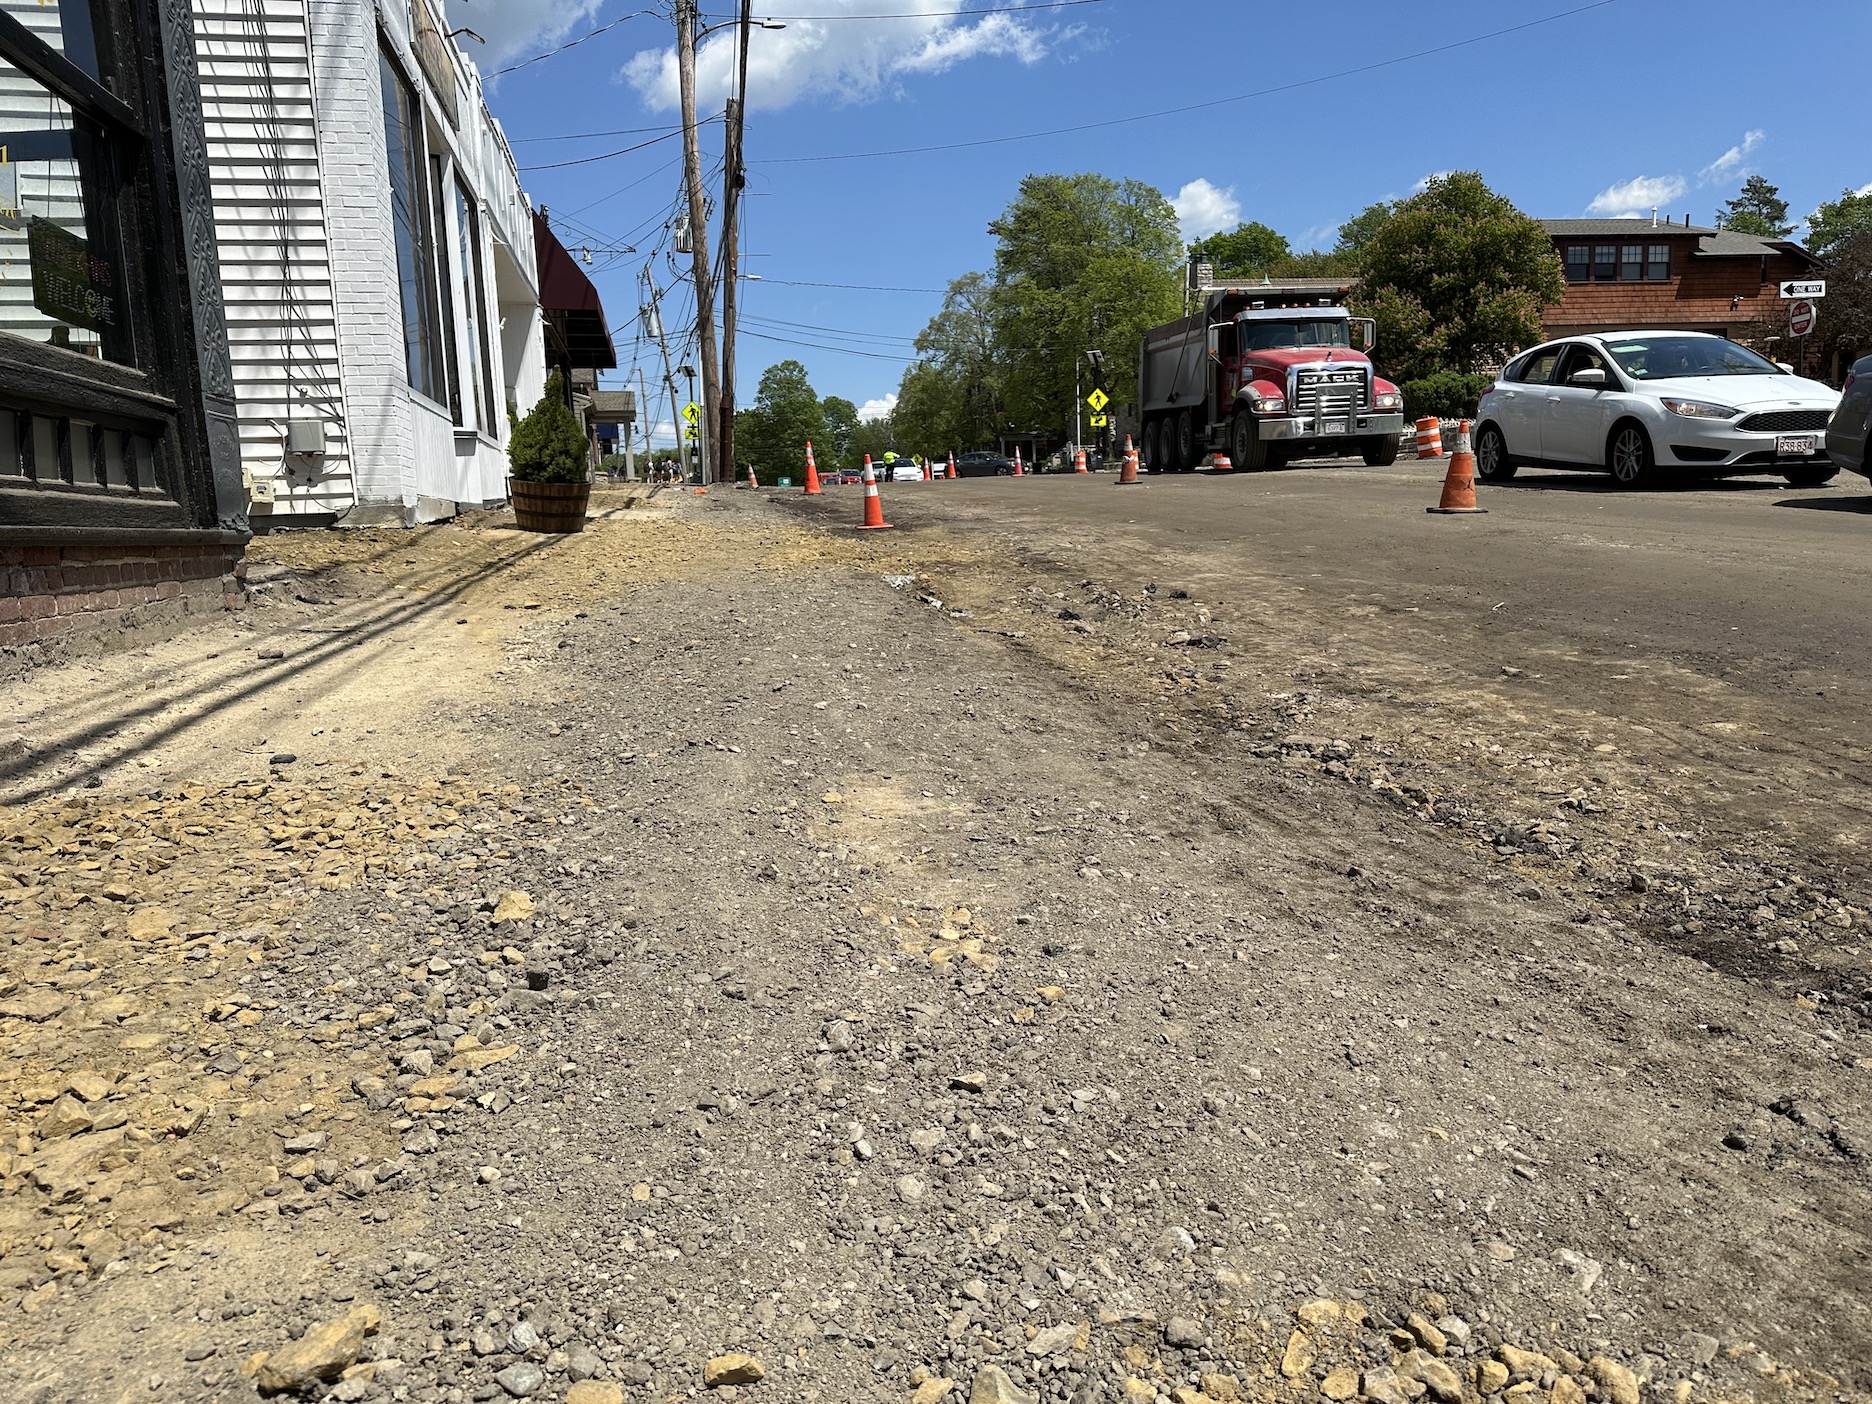 Main Street Corridor Project update: Main Street paving this week; detours planned